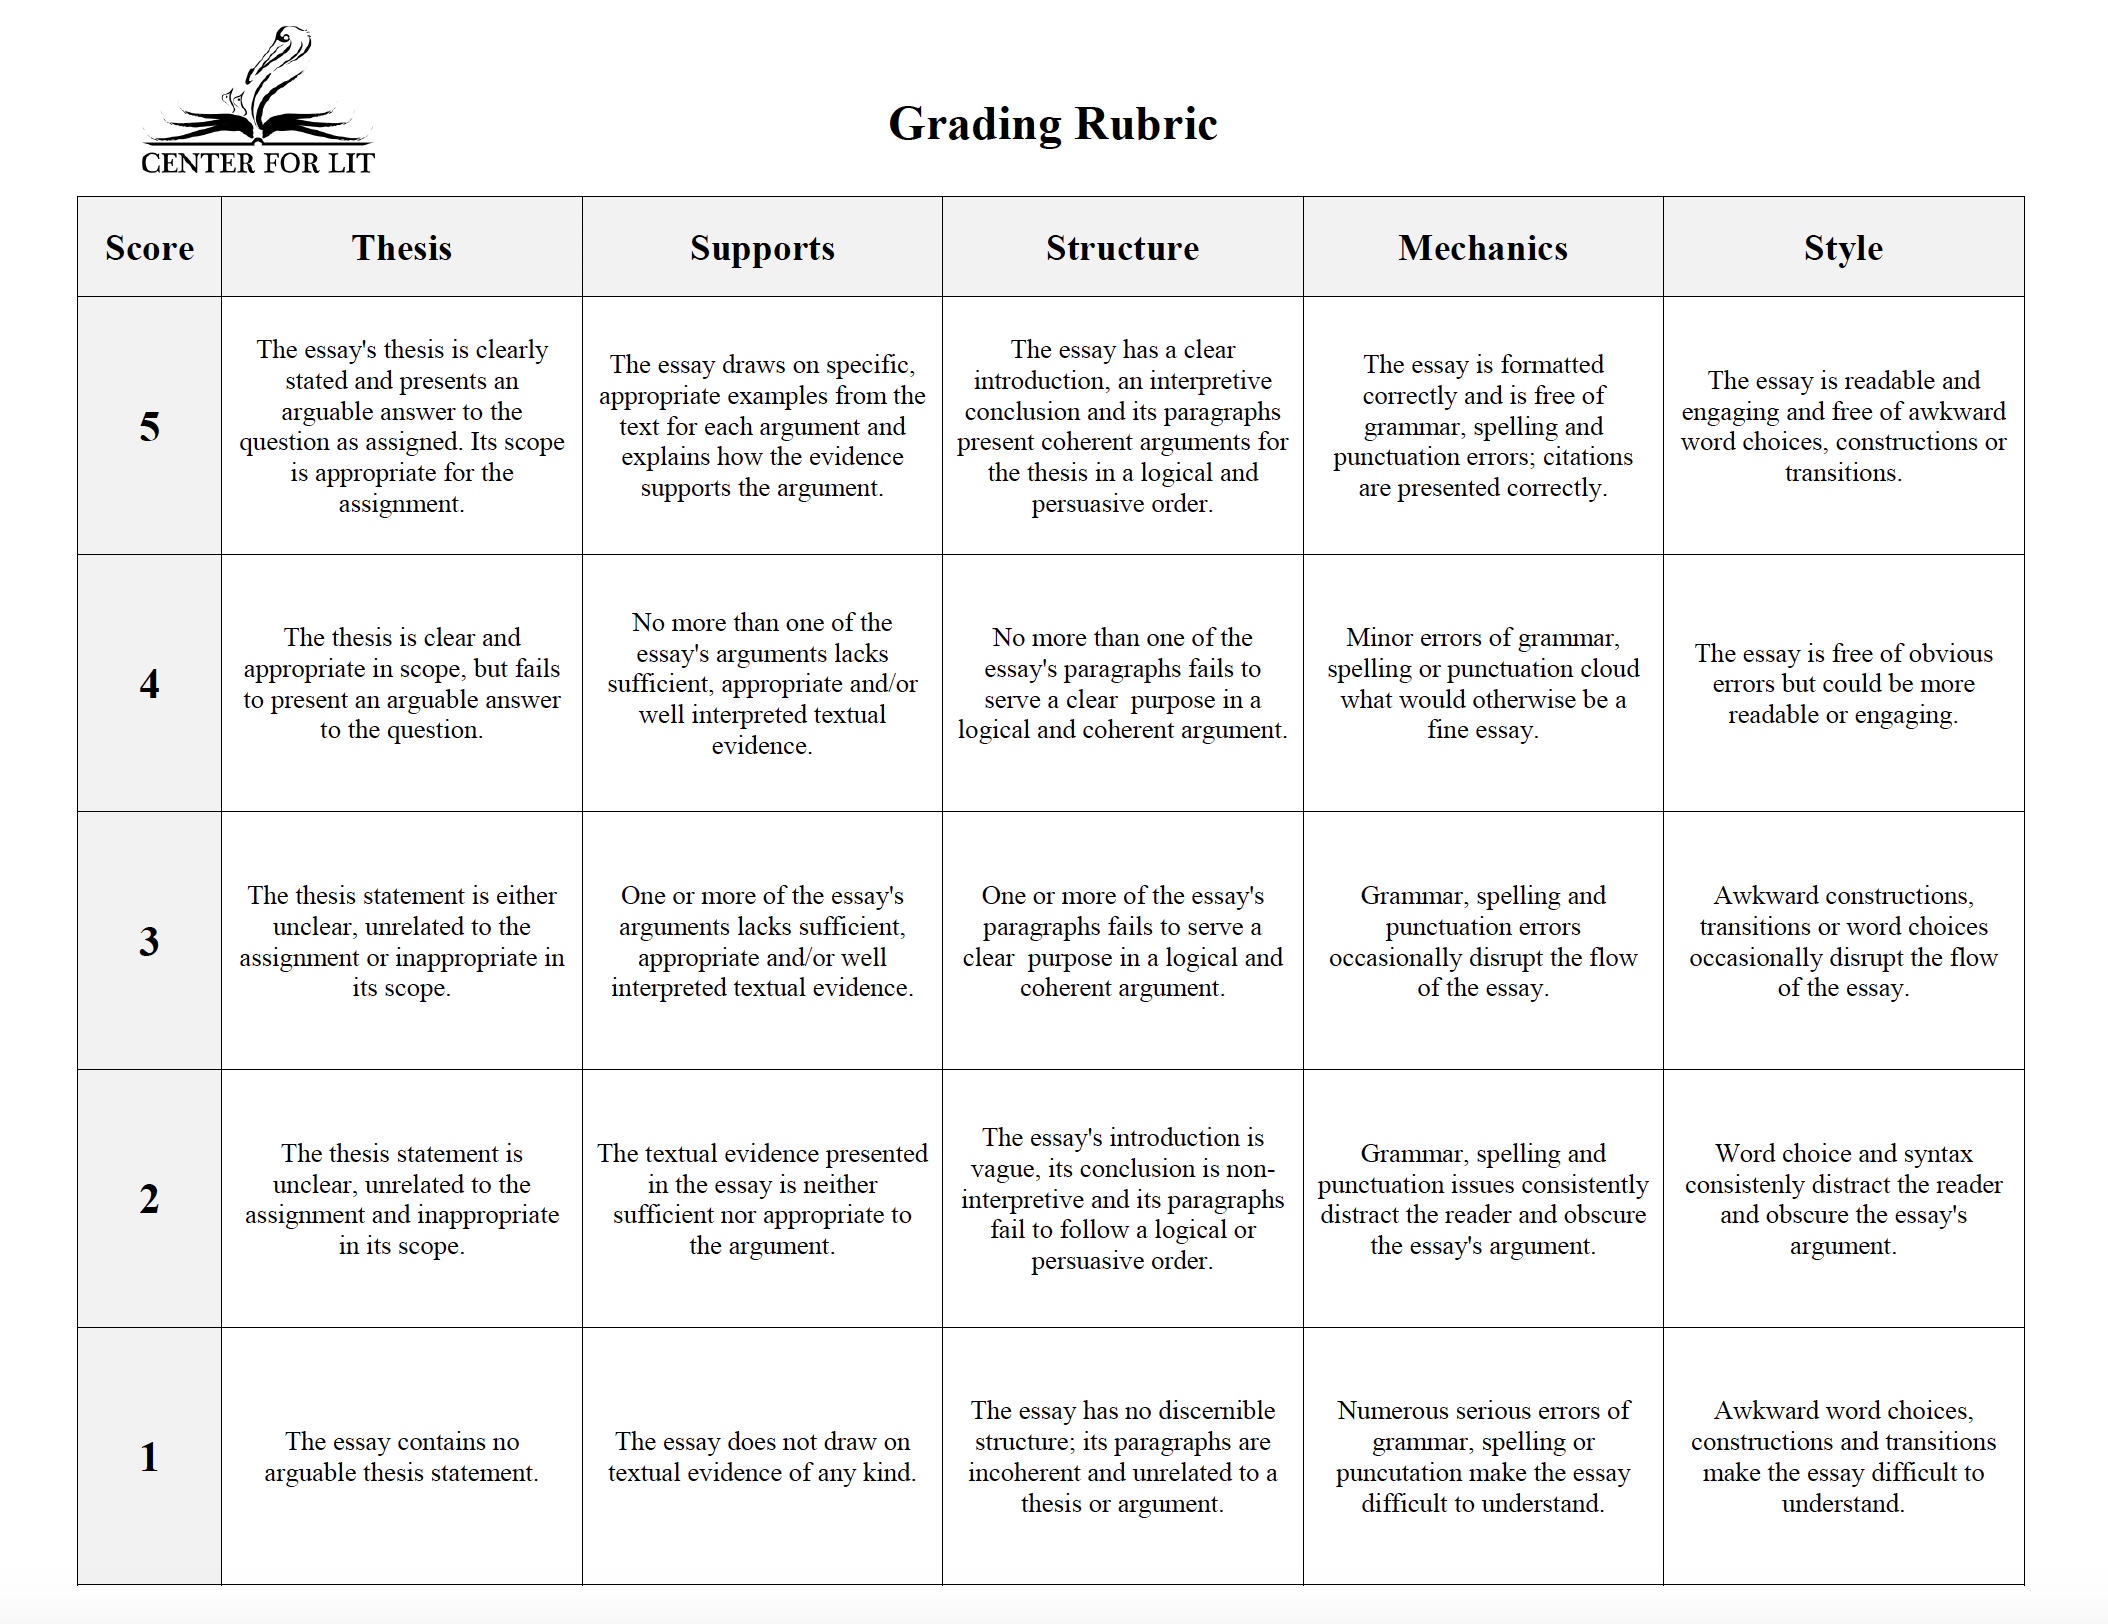 thesis grading rubric